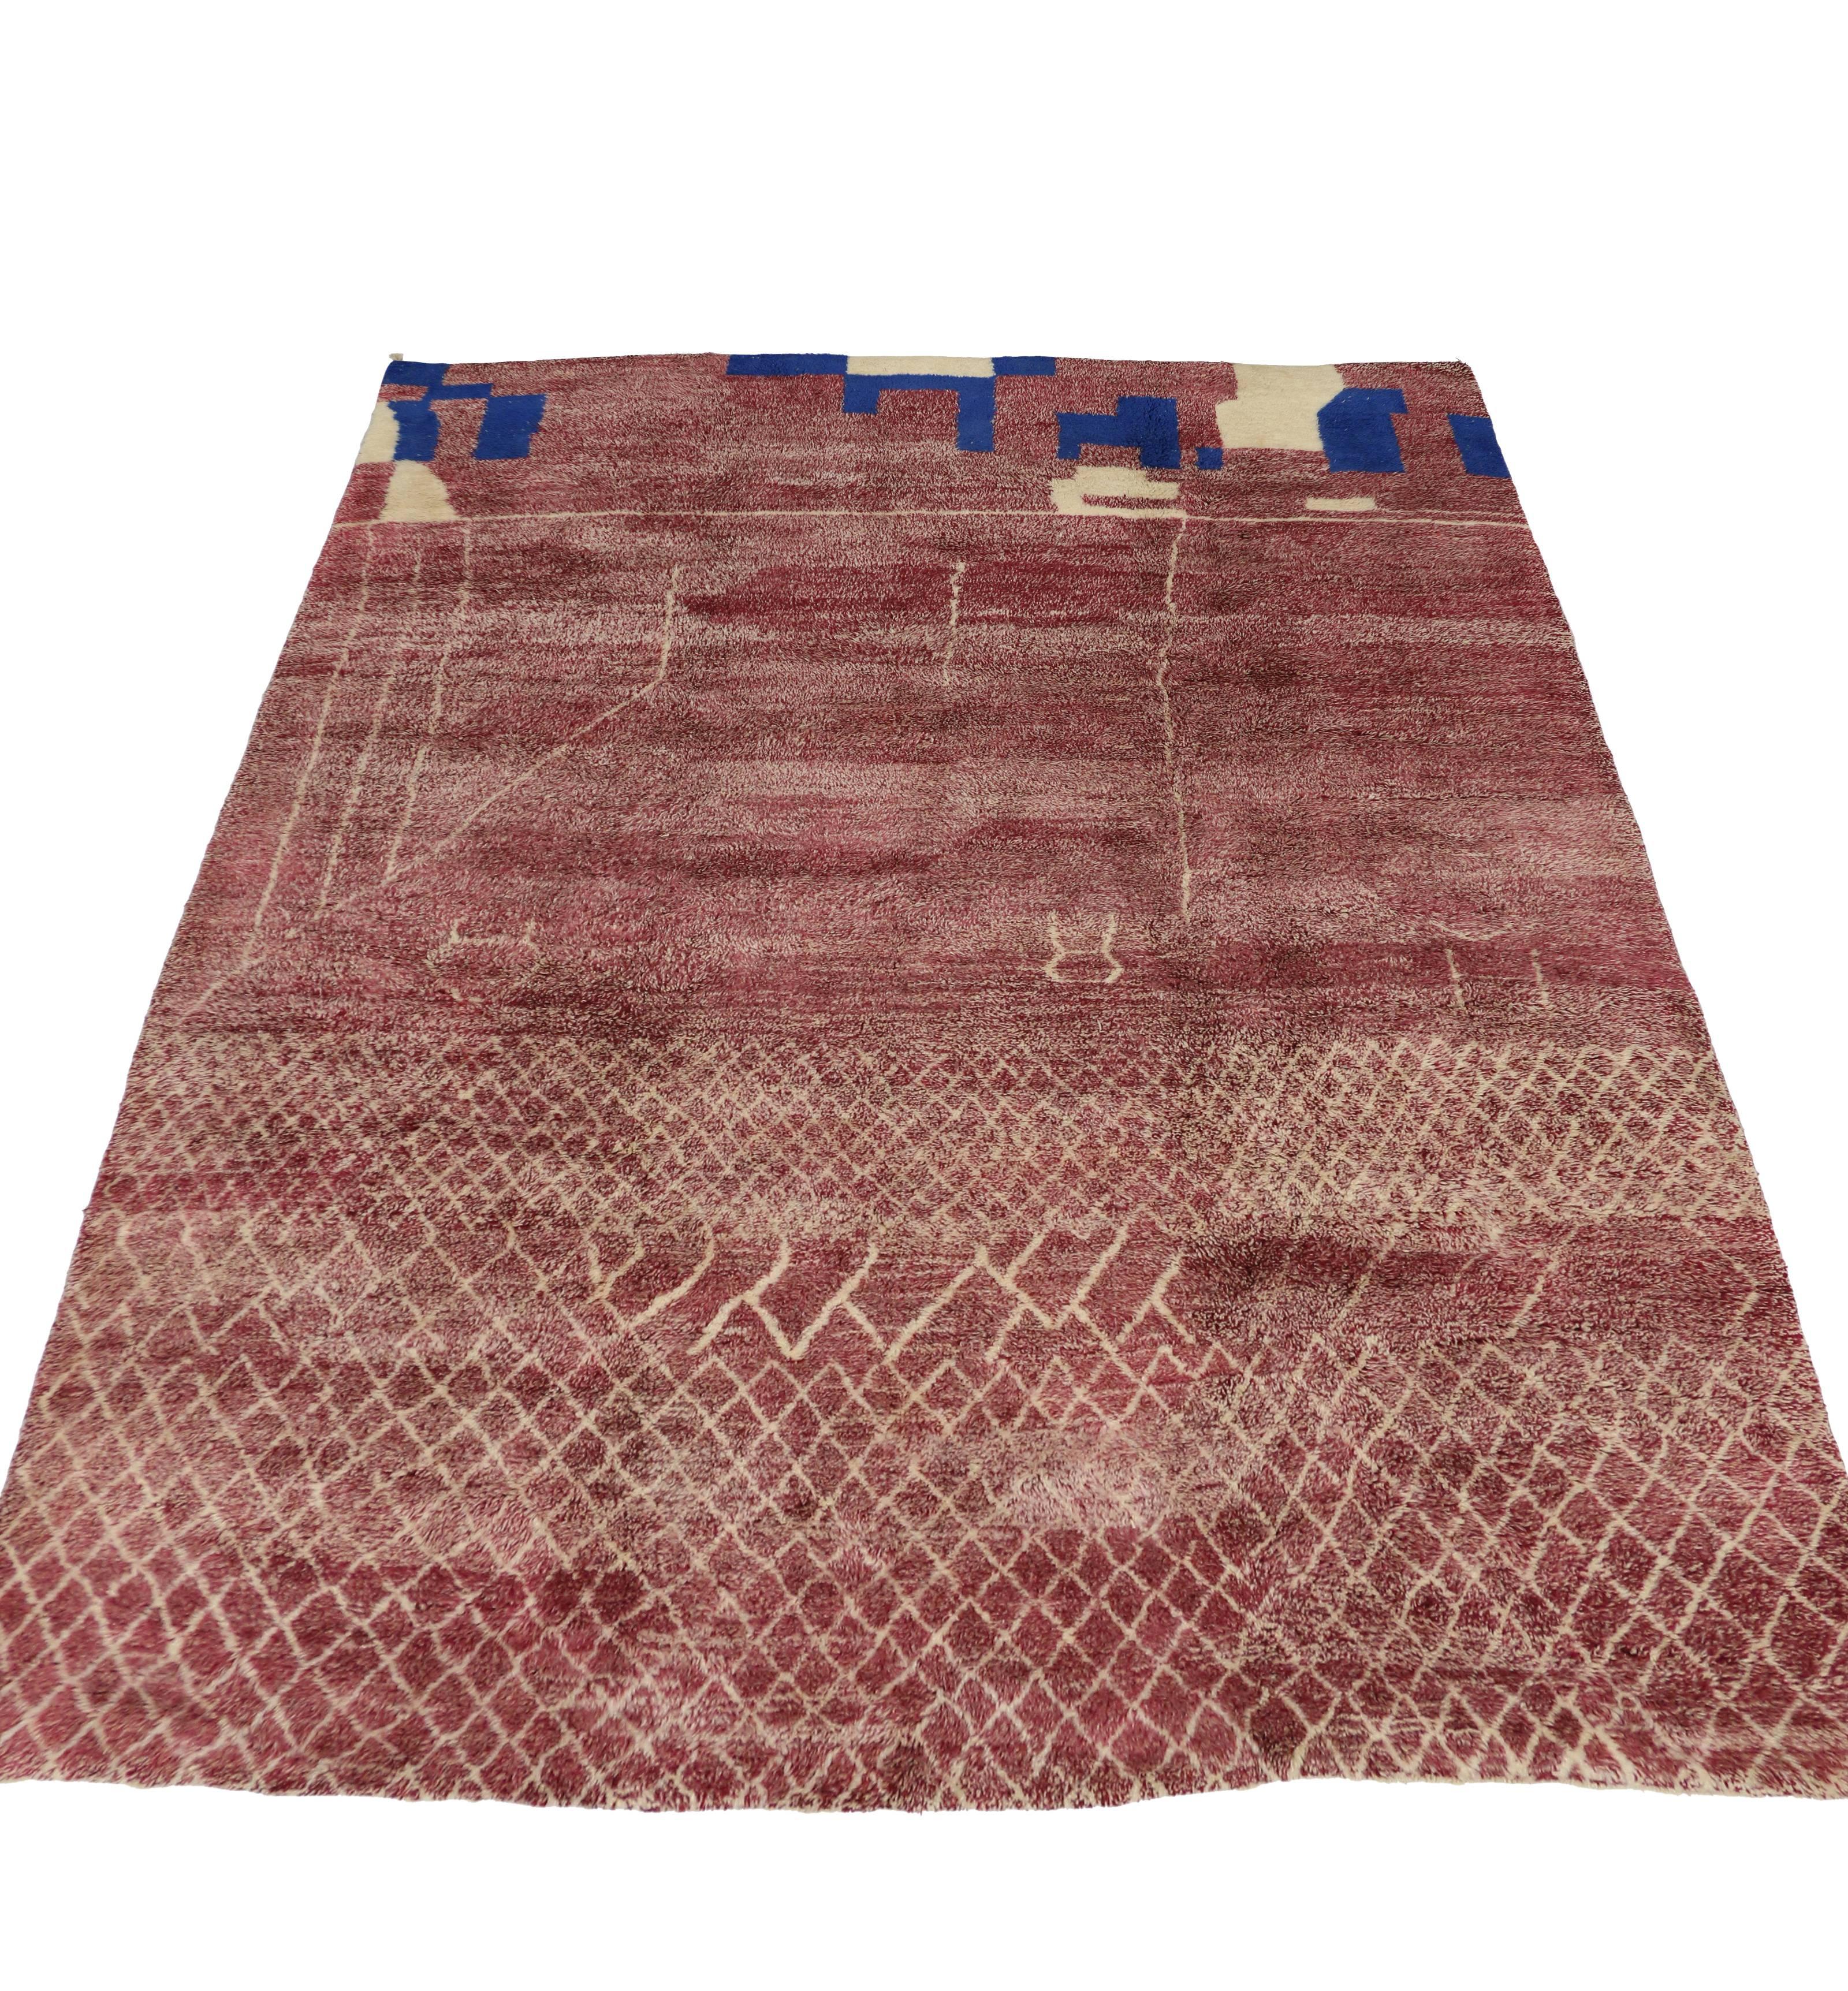 Contemporary Boho Chic Moroccan Rug with Modern Tribal Design 1